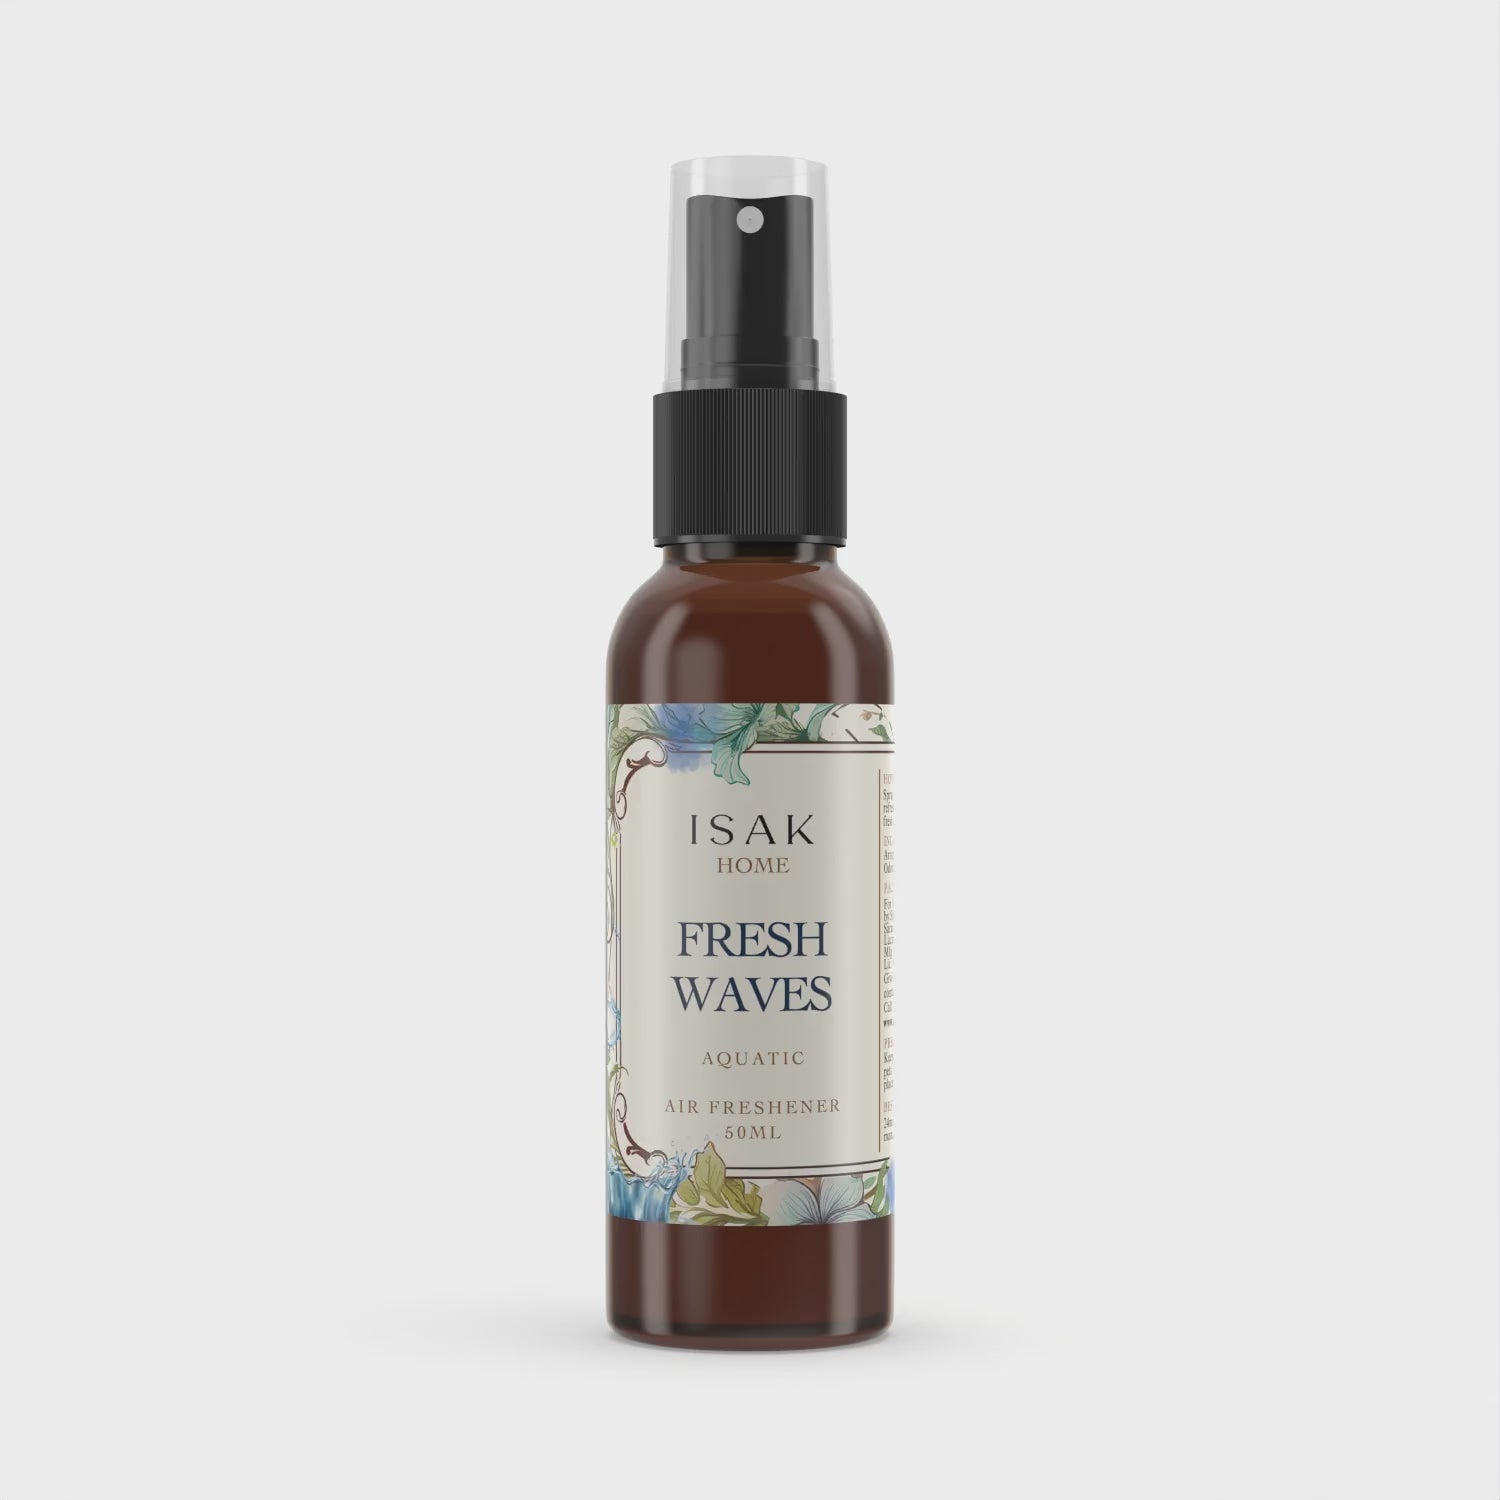 Fresh Waves Home scent